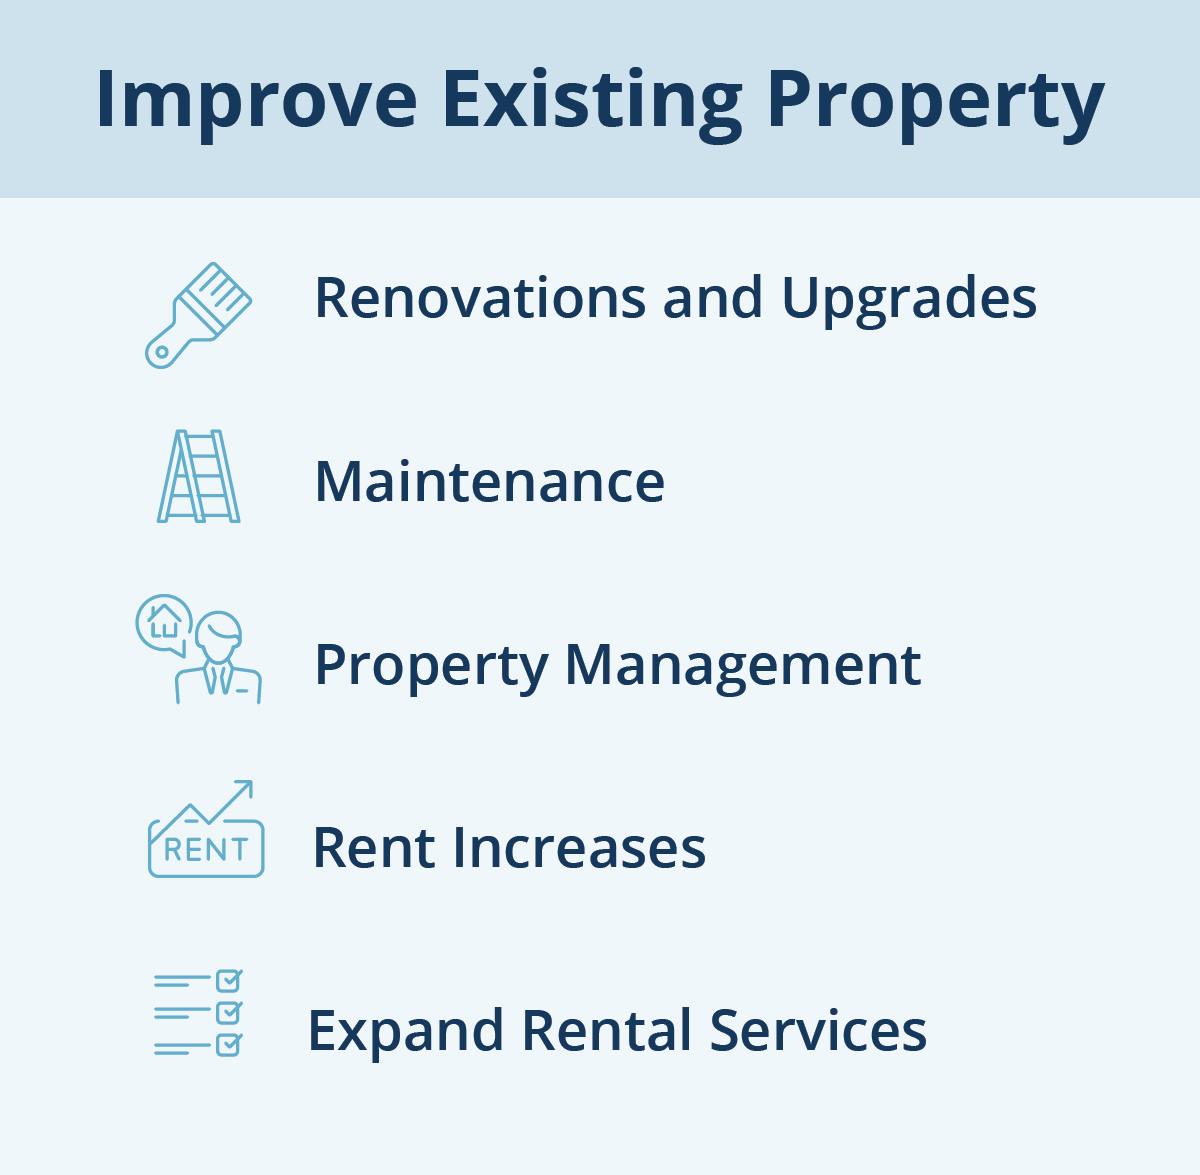 residential real estate investment property improvements inline